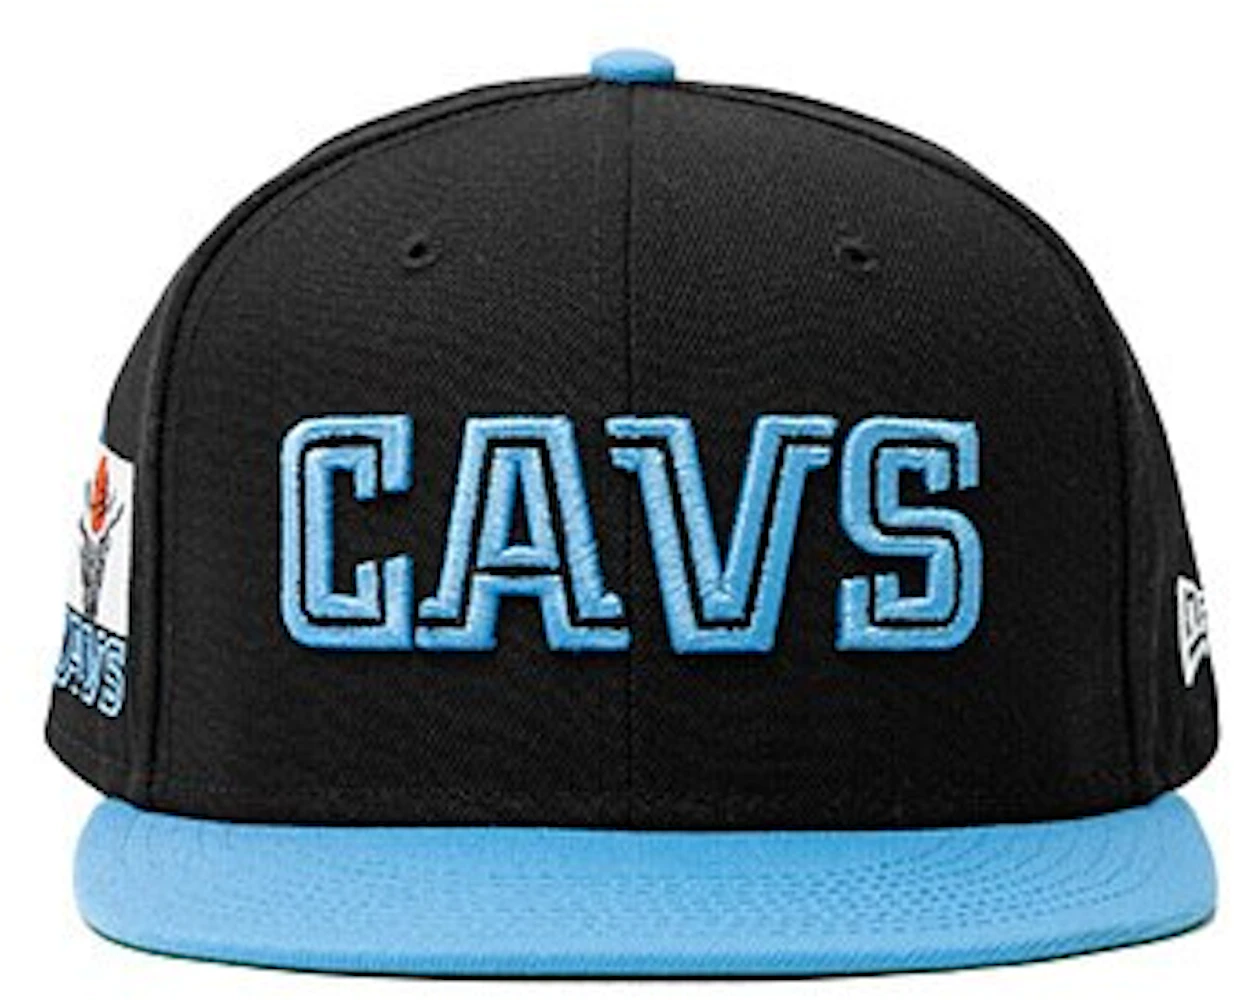 Cavaliers going back to the '90s with retro black and powder blue